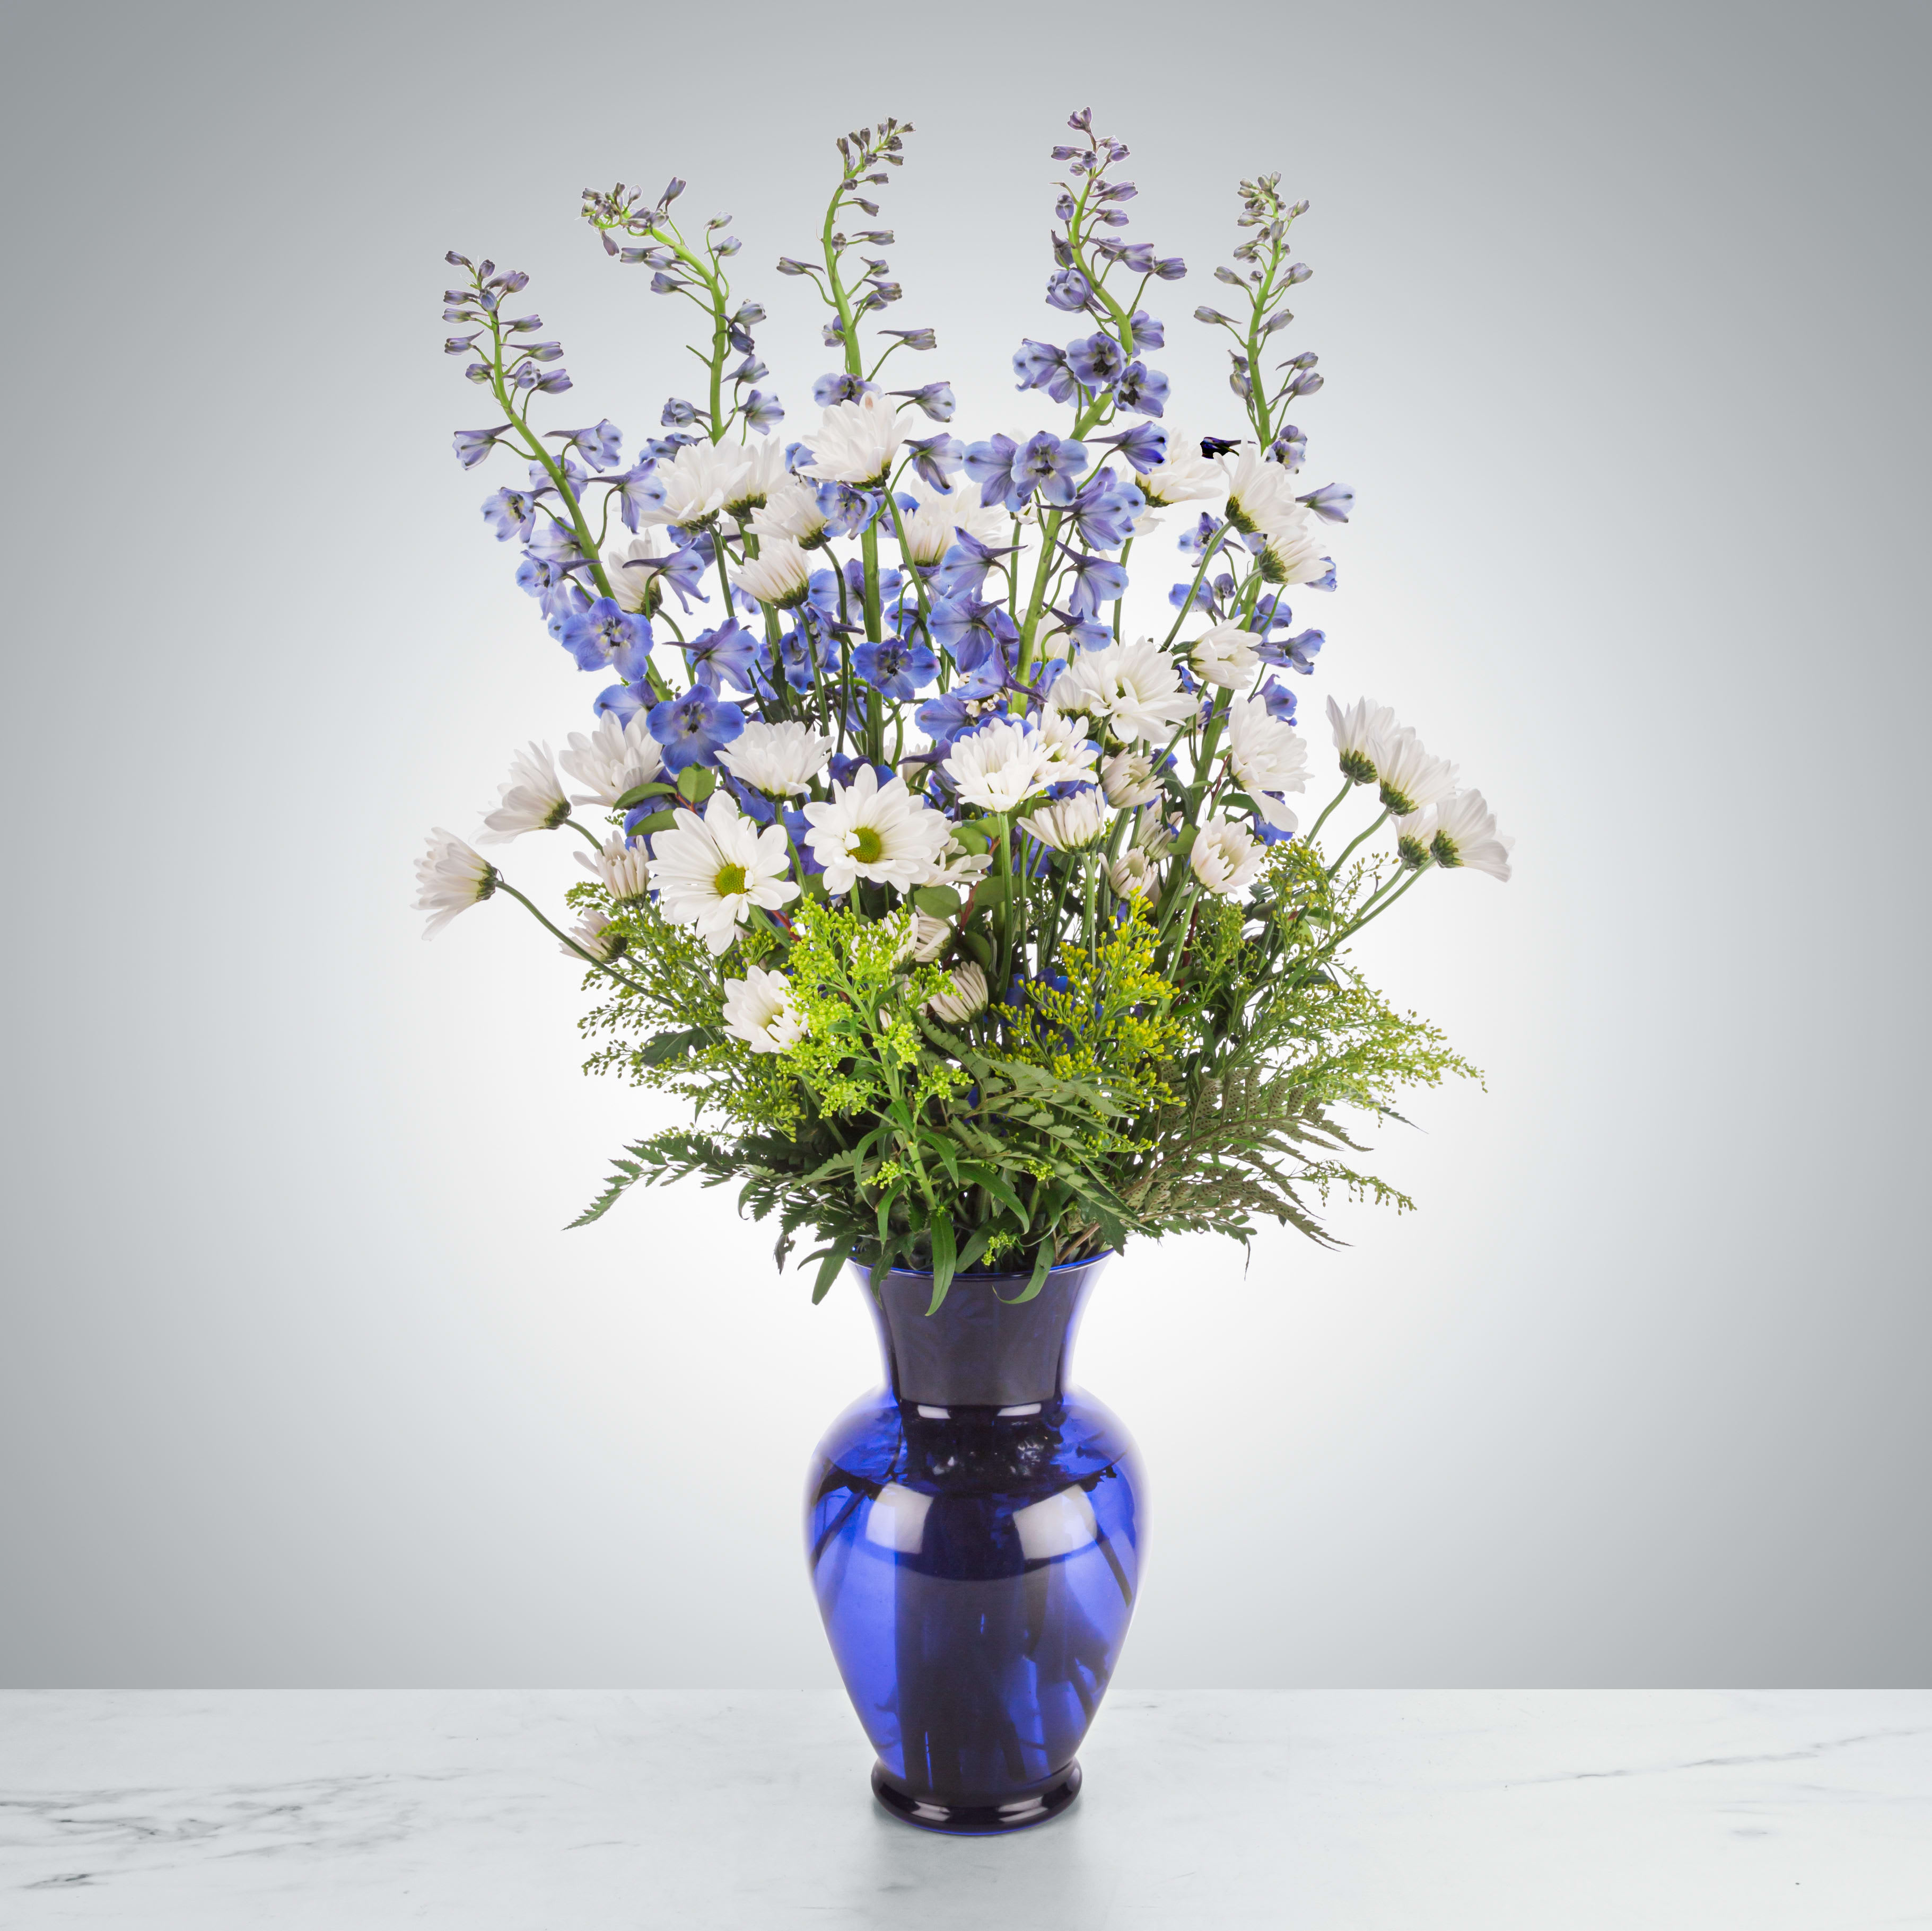 Ahoy There by BloomNation™ - This tall blue and white arrangement is a breezy breath of summer air in an interesting vase. Featuring goldenrod, delphinium, and white daisy poms this arrangement is a sweet summer gesture. Send it for birthdays or as a just-because surprise.  Approximate Dimensions: 18&quot;D X 32&quot;H